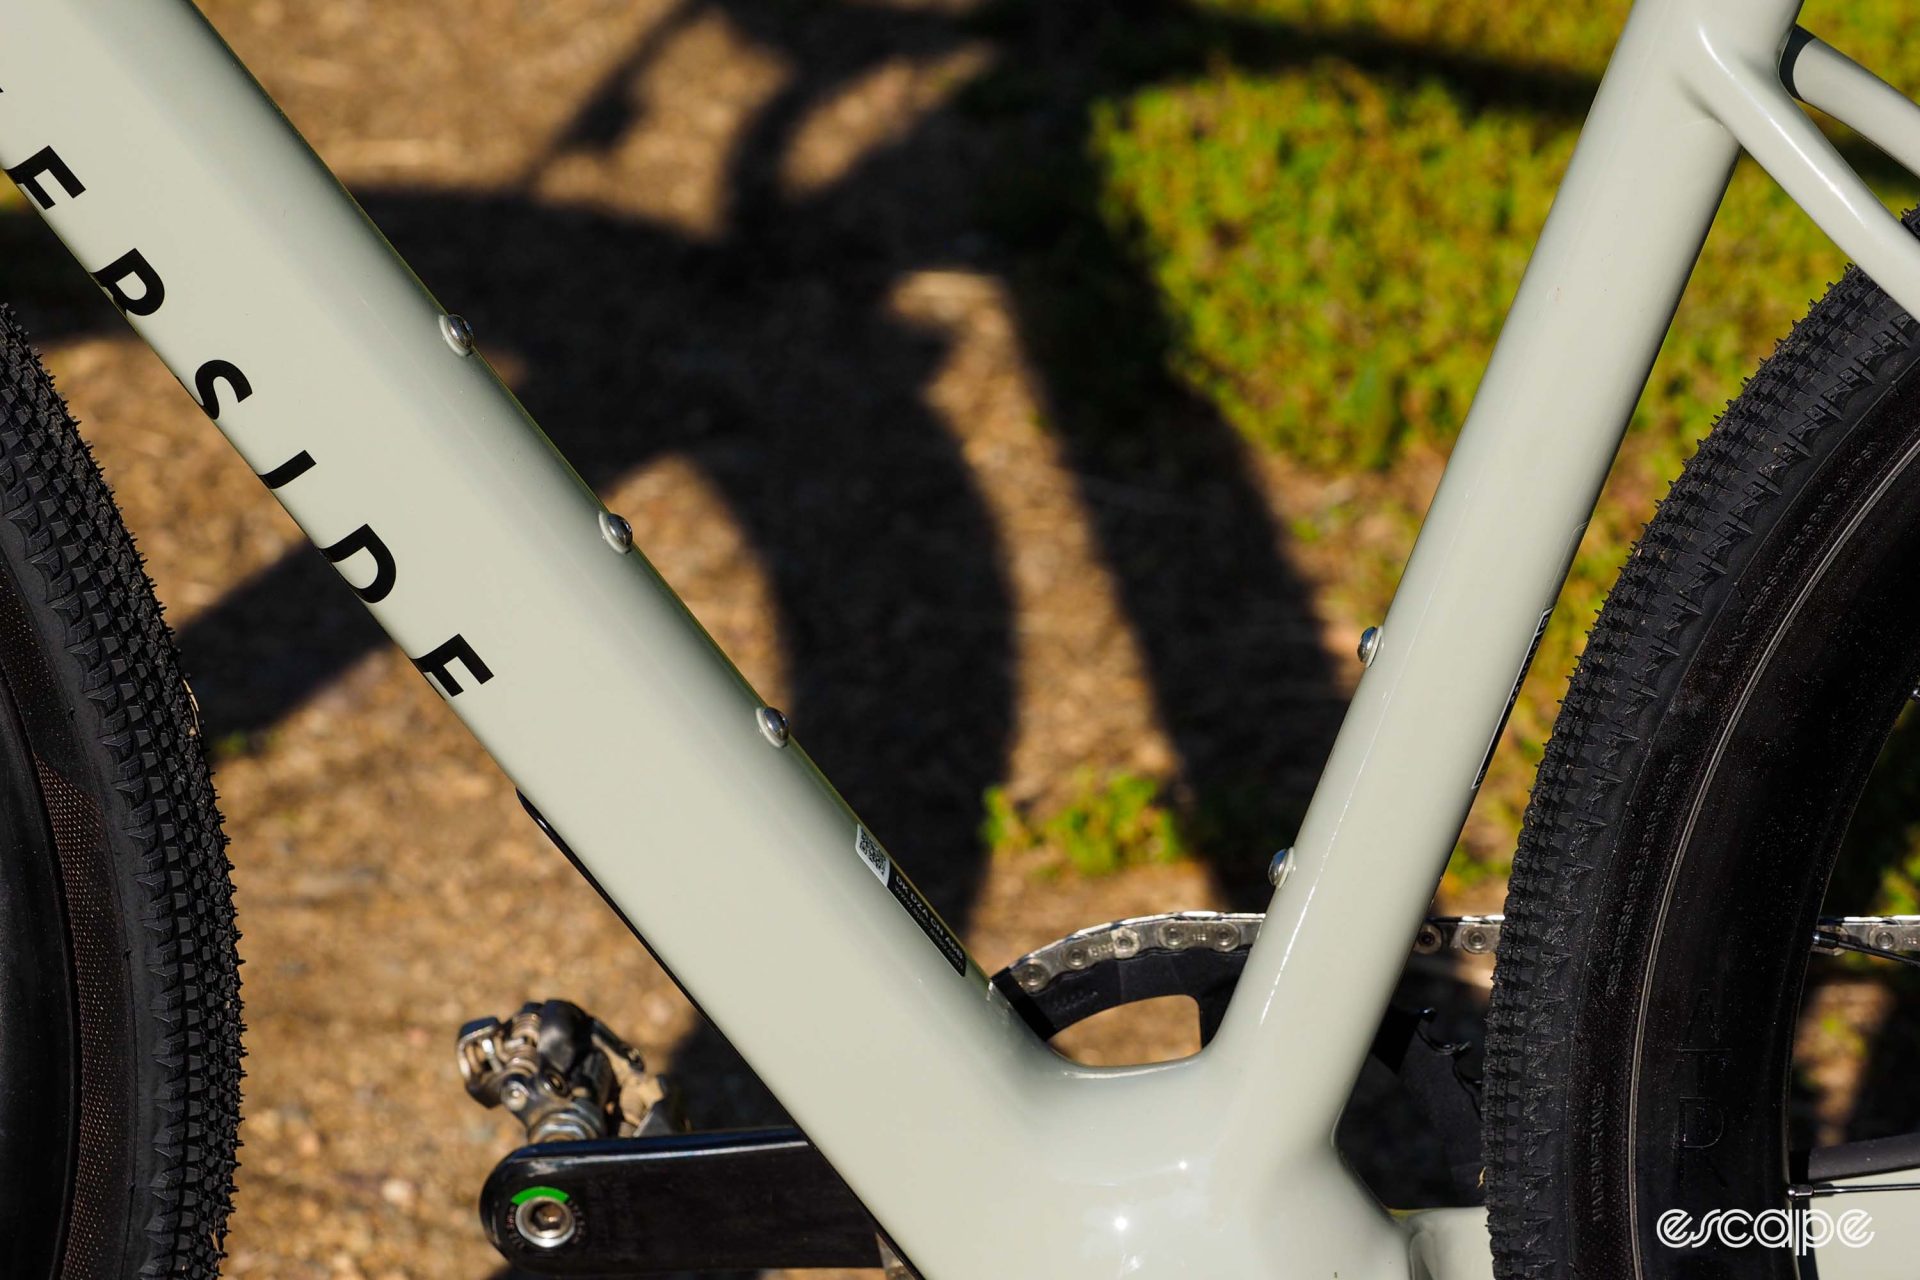 The main triangle, showing only two bottle mounts, with a two-position mount for the downtube bottle cage.